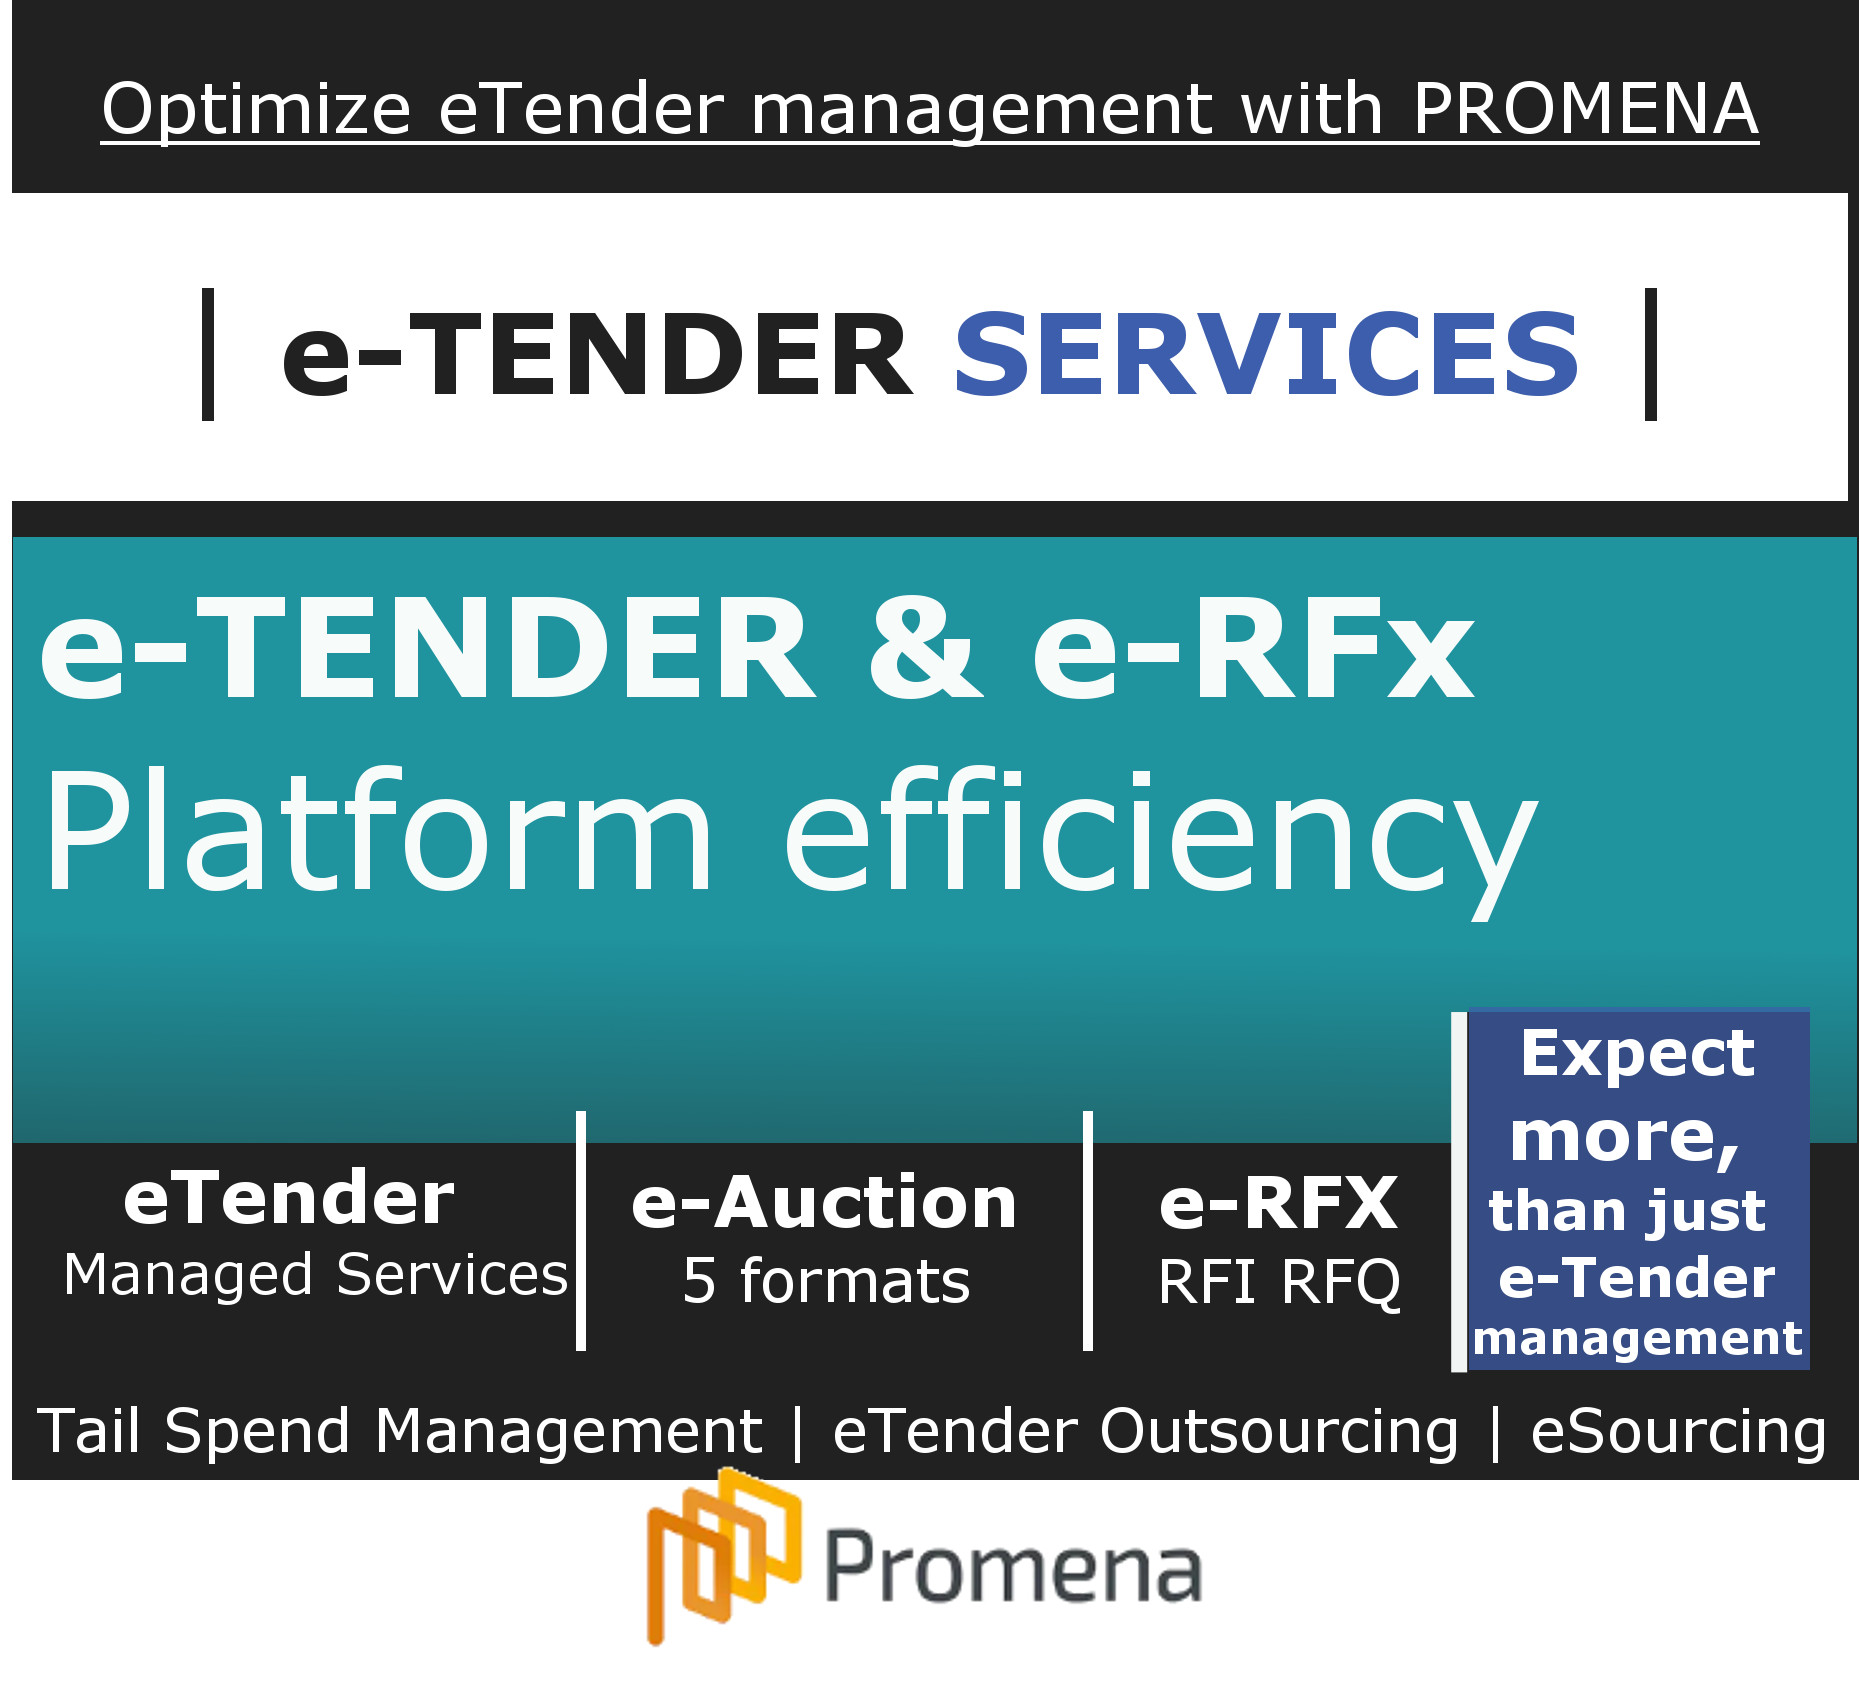 Promena e-Tender Platform,  eTendering and Procurement Outsourced Services picture